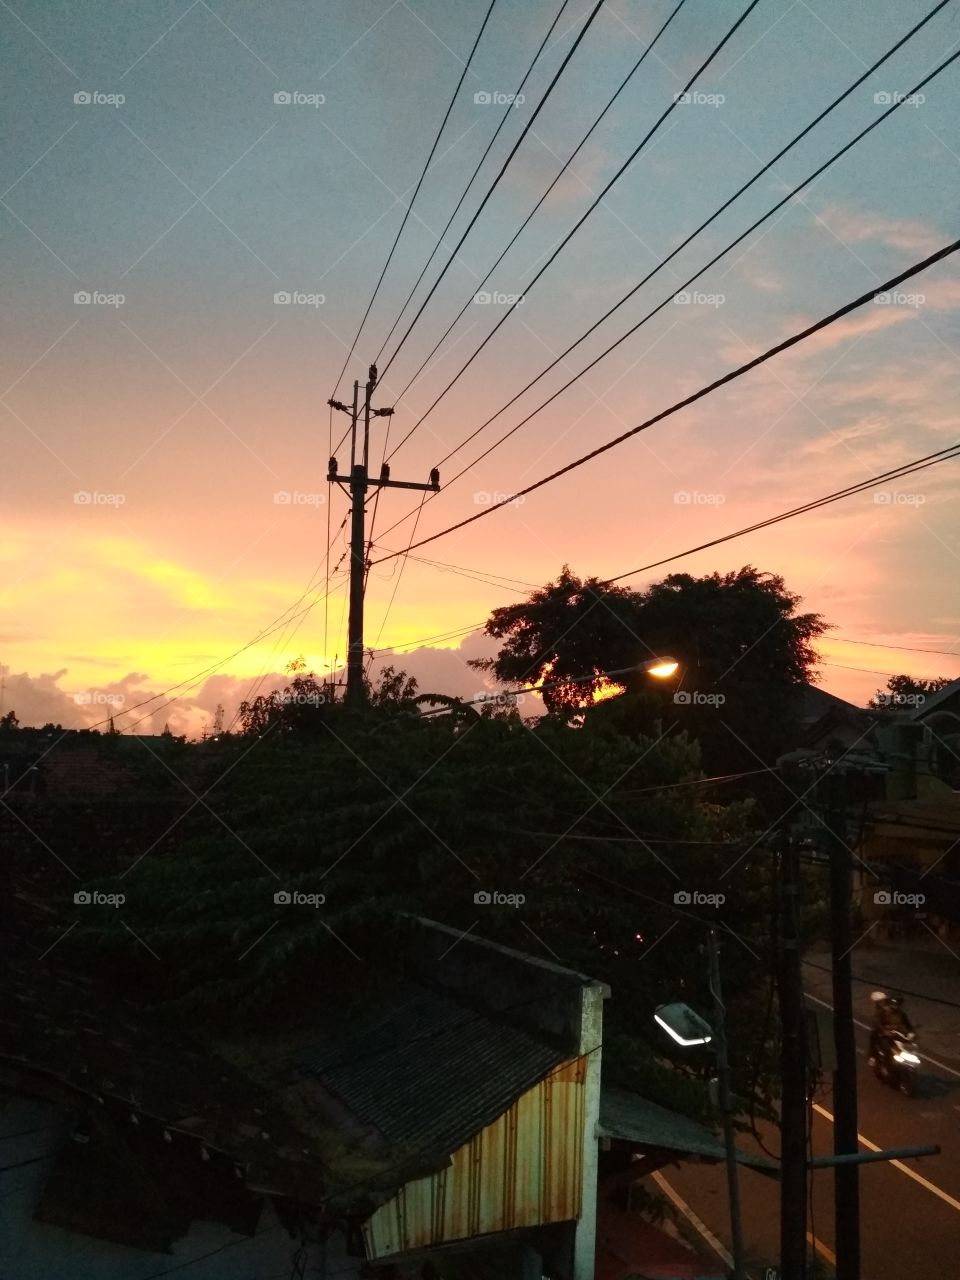 No Person, Electricity, Energy, Sunset, Wire